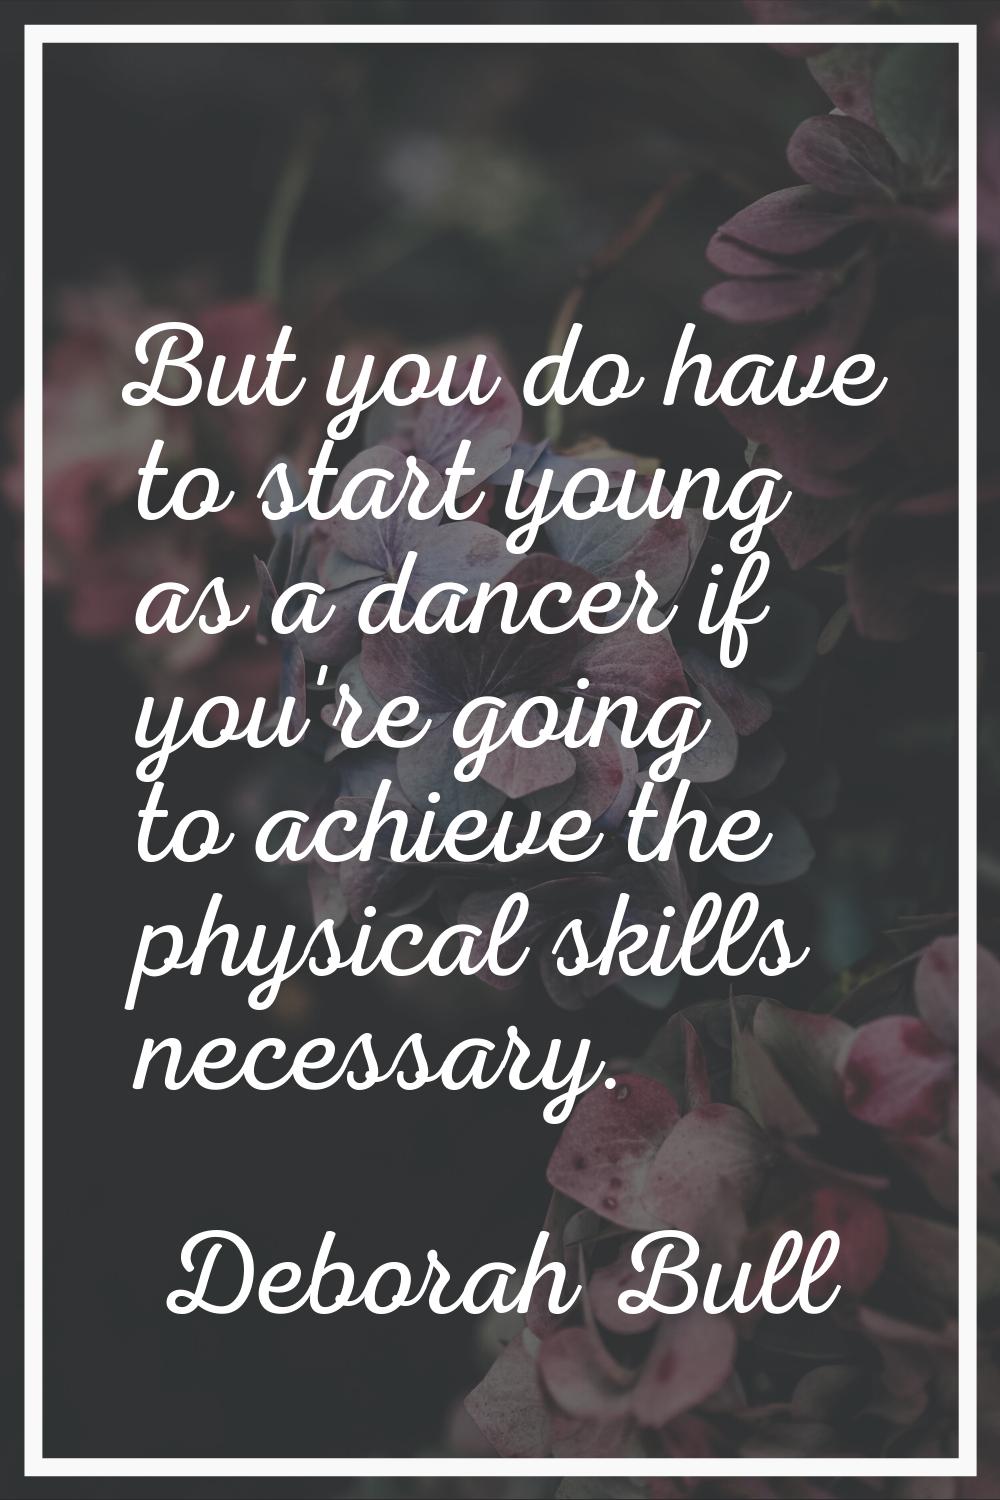 But you do have to start young as a dancer if you're going to achieve the physical skills necessary